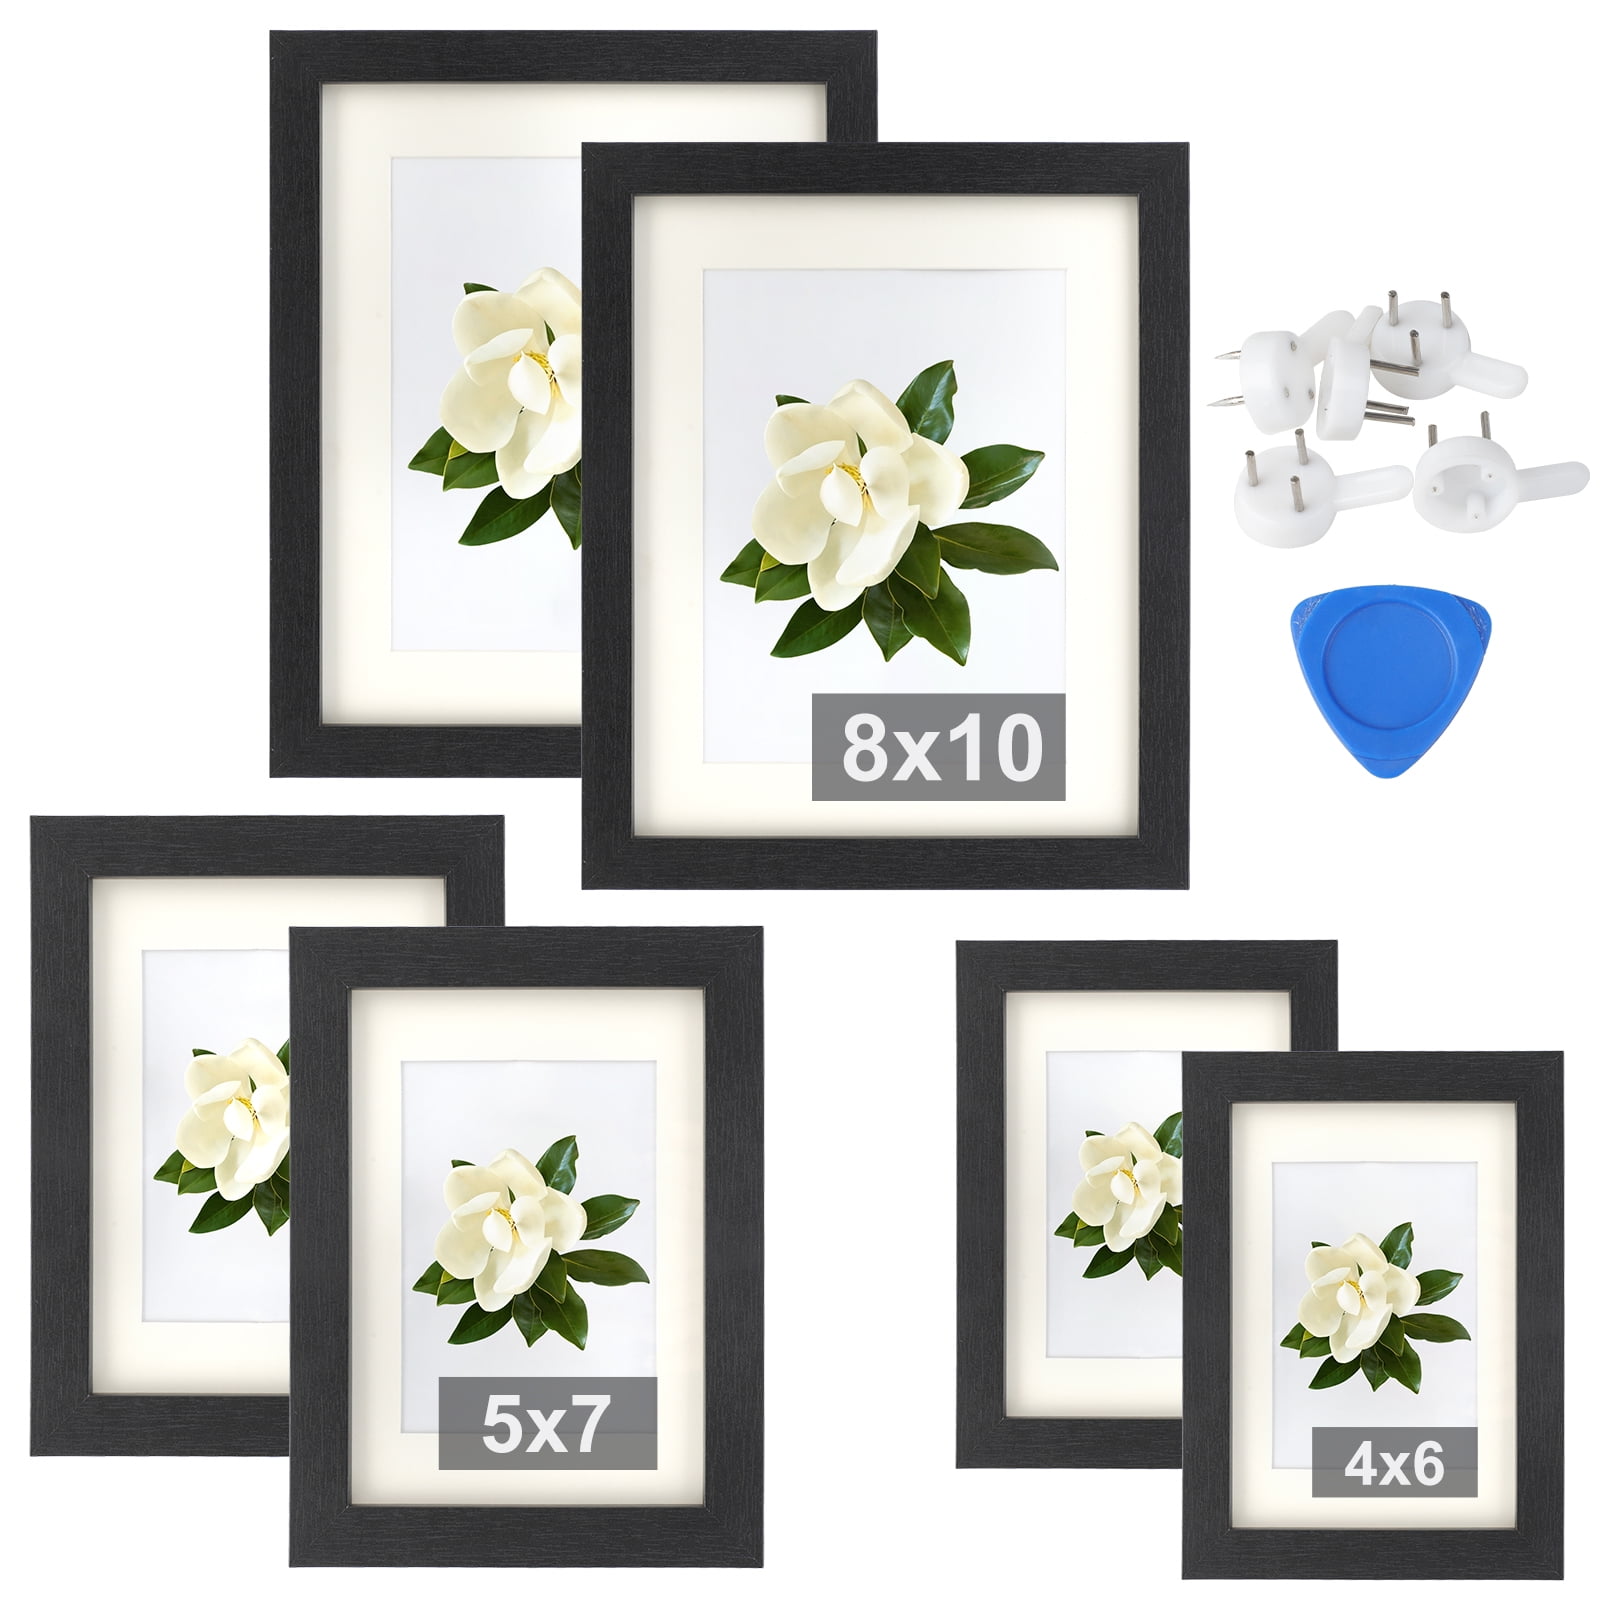 Details about   METAL Art HOLDER Bracket EASEL for Art Framed Pictures Mirrors Table Top Display 